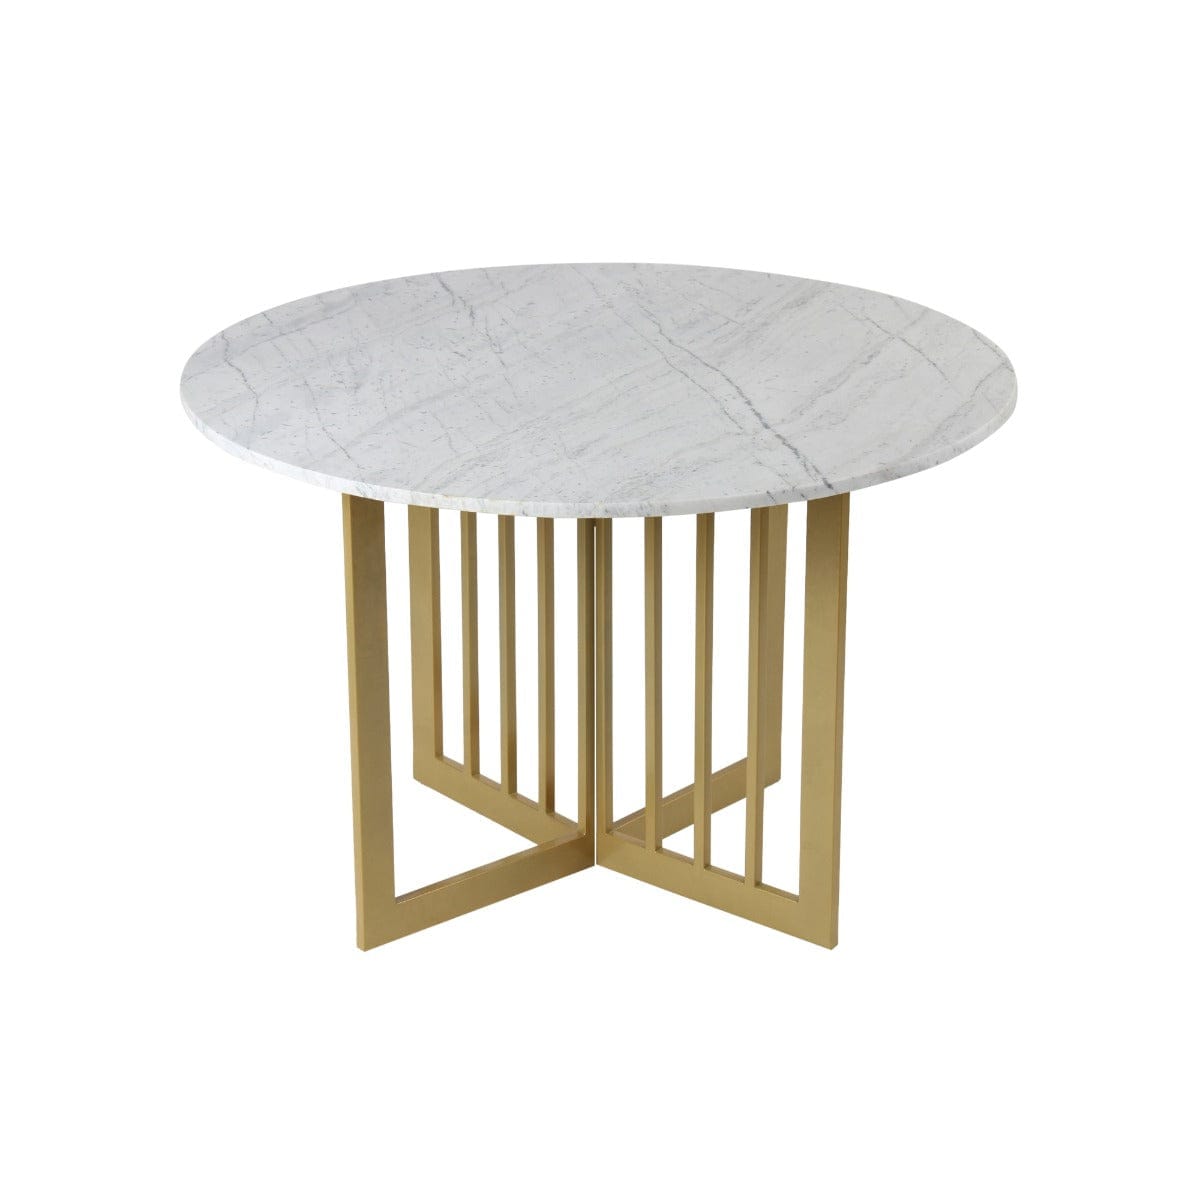 Kitson 4 Seater Round Marble Dining Table In Gold Finish